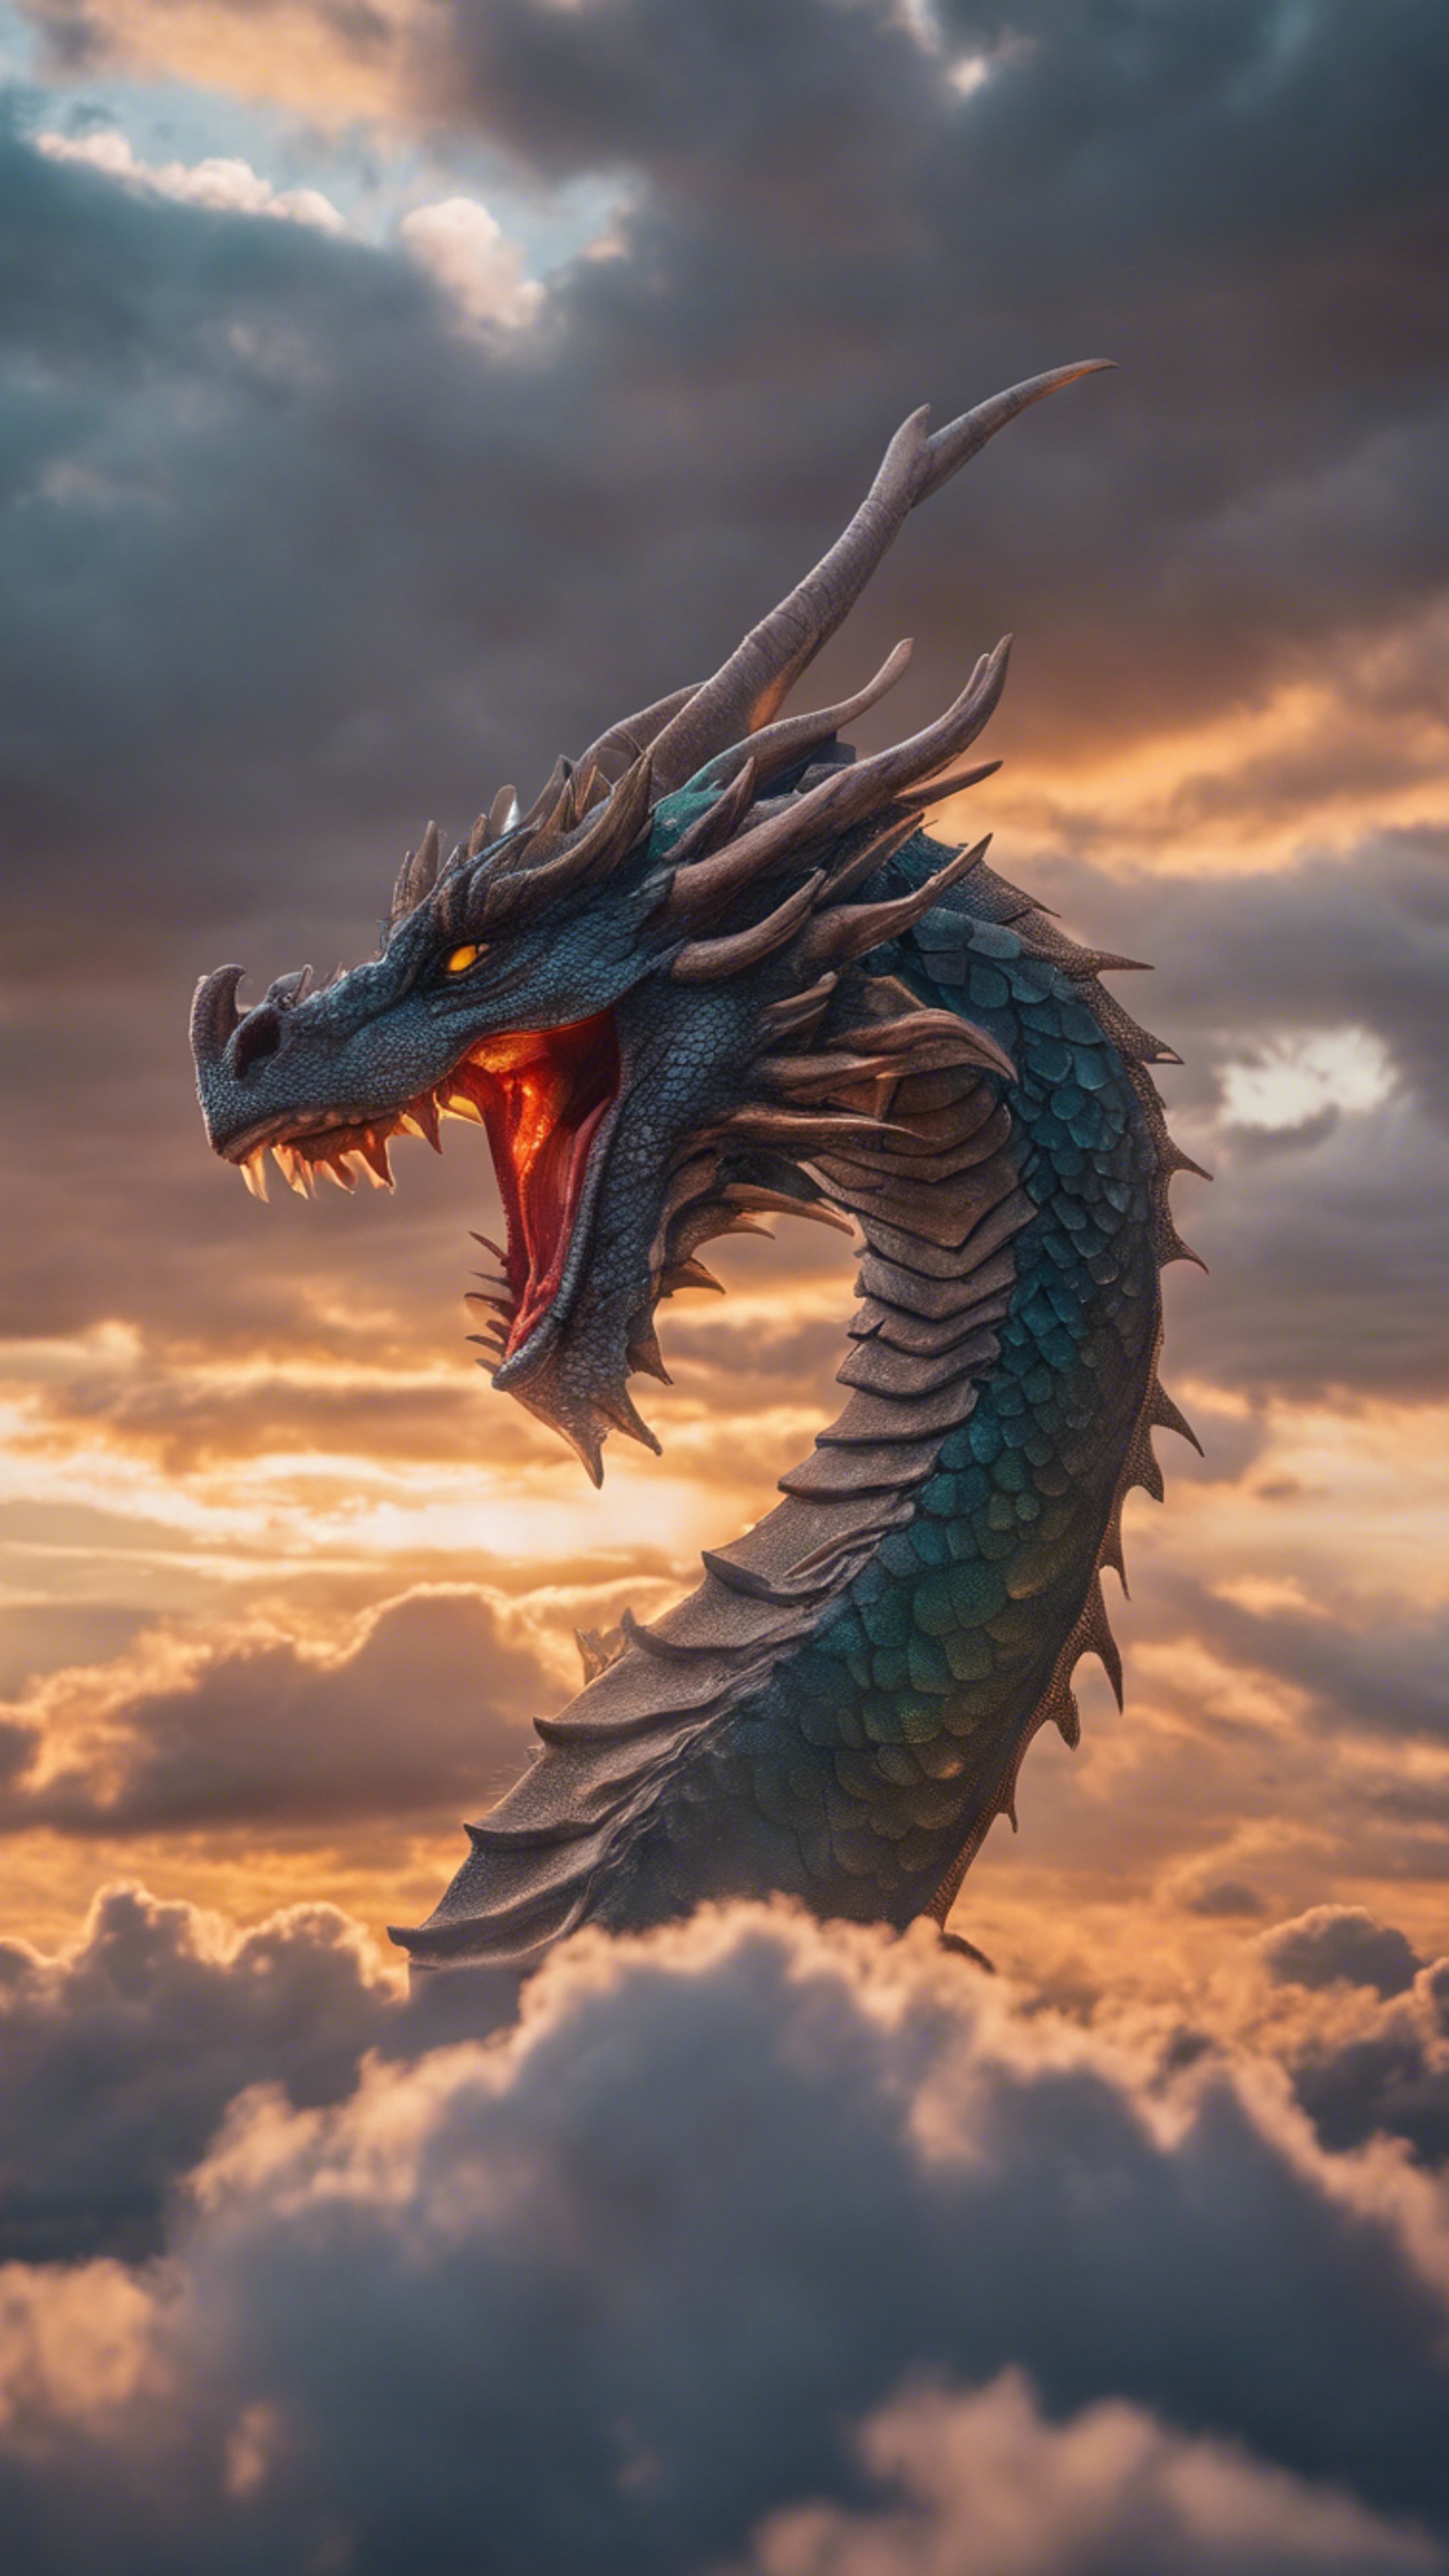 A dragon of pure light breaking through the clouds as the sun sets, its scales reflecting the vibrant colors of dusk. 墙纸[43b0d43f7e0c44e88acd]